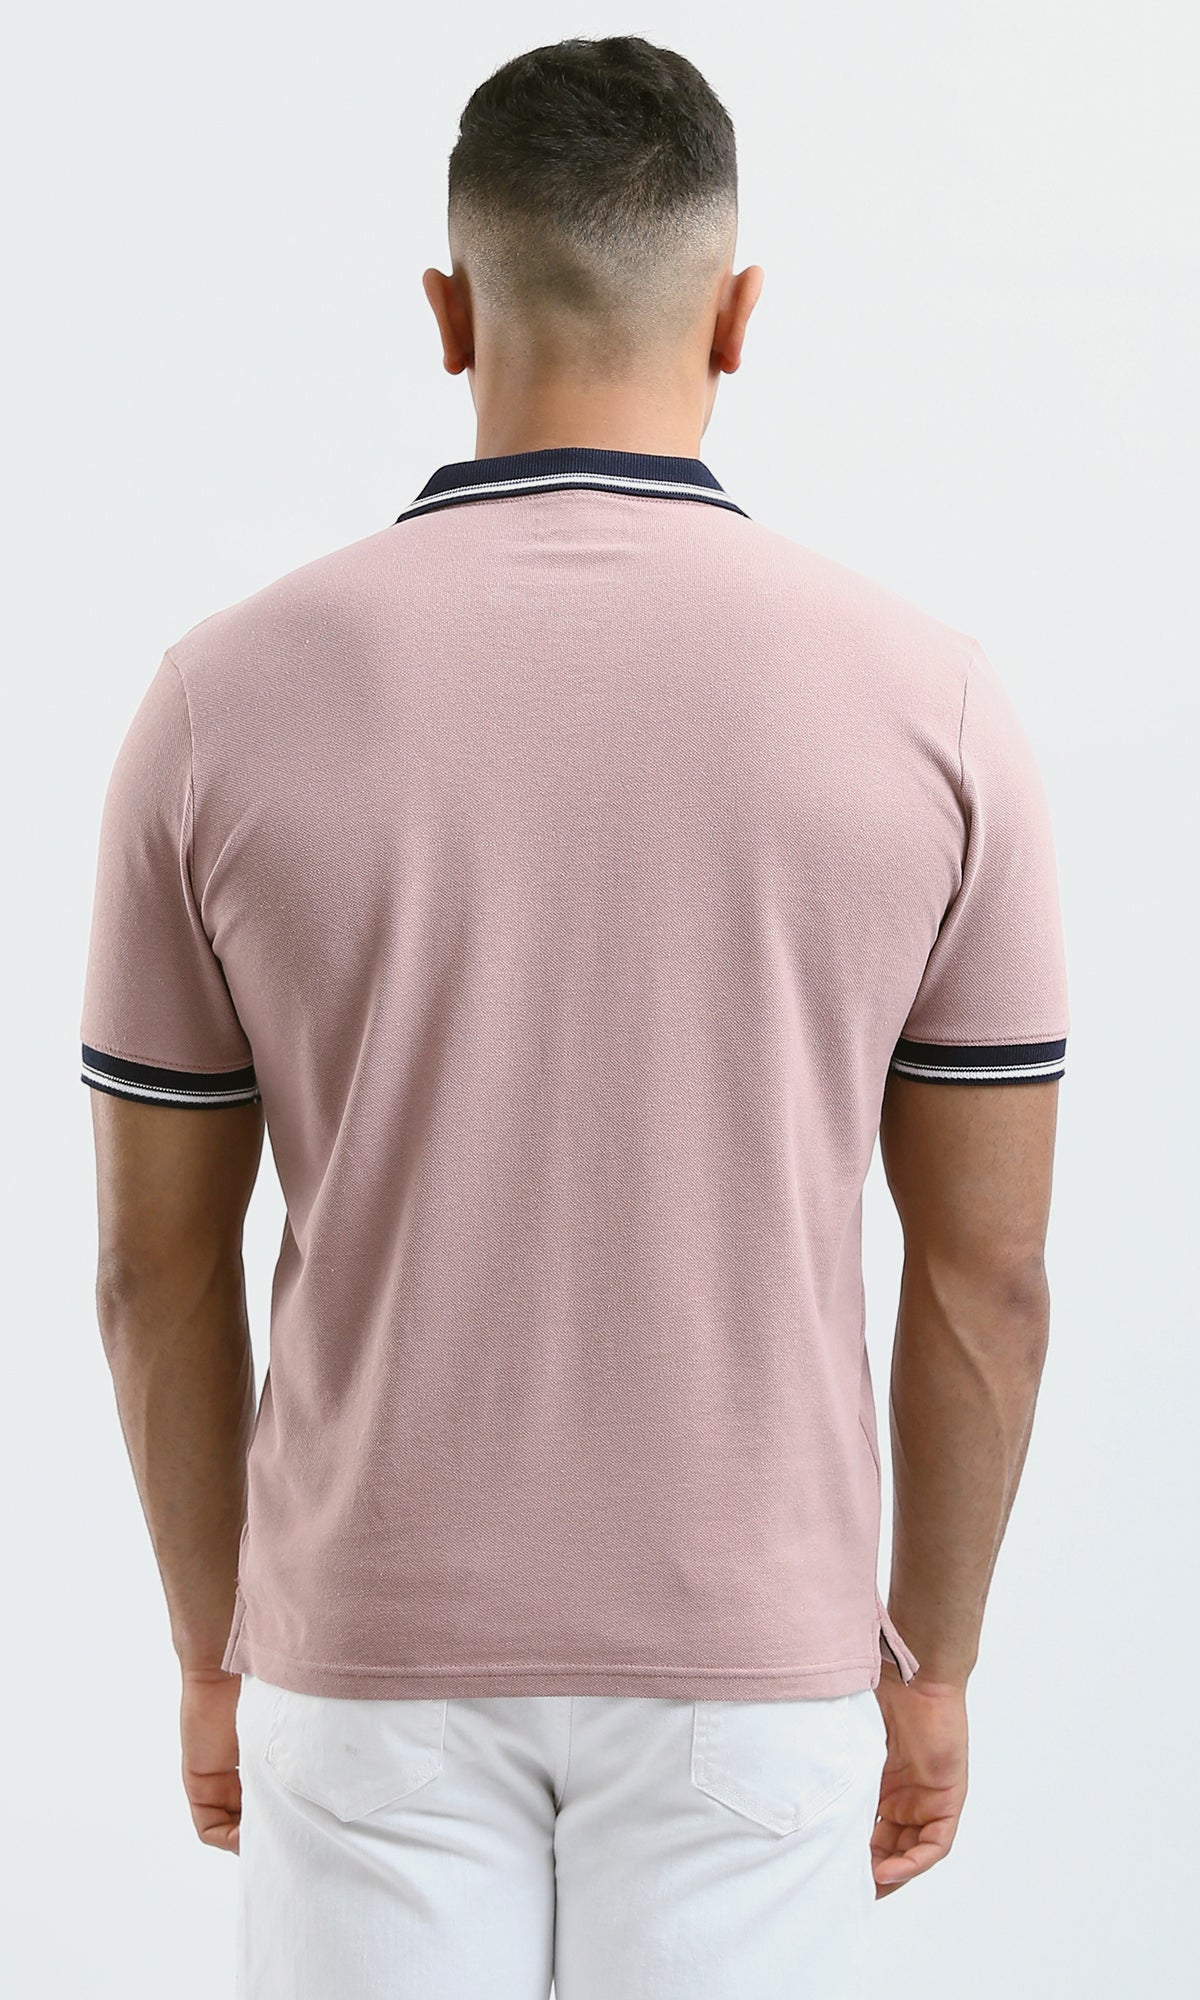 O189607 Nude Pink Solid Polo Shirt With Classic Collar